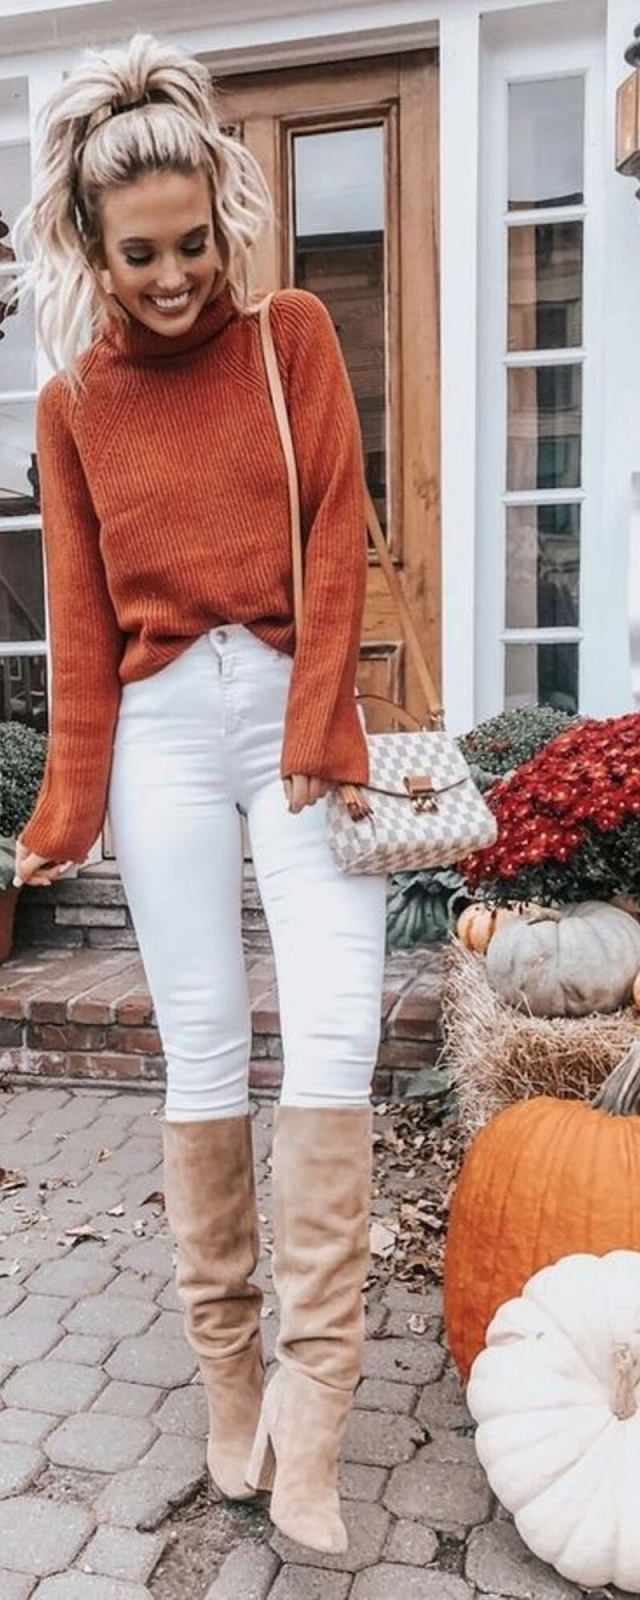 10 TRENDY FALL OUTFITS TO COPY RIGHT NOW Women's Fashion Passion